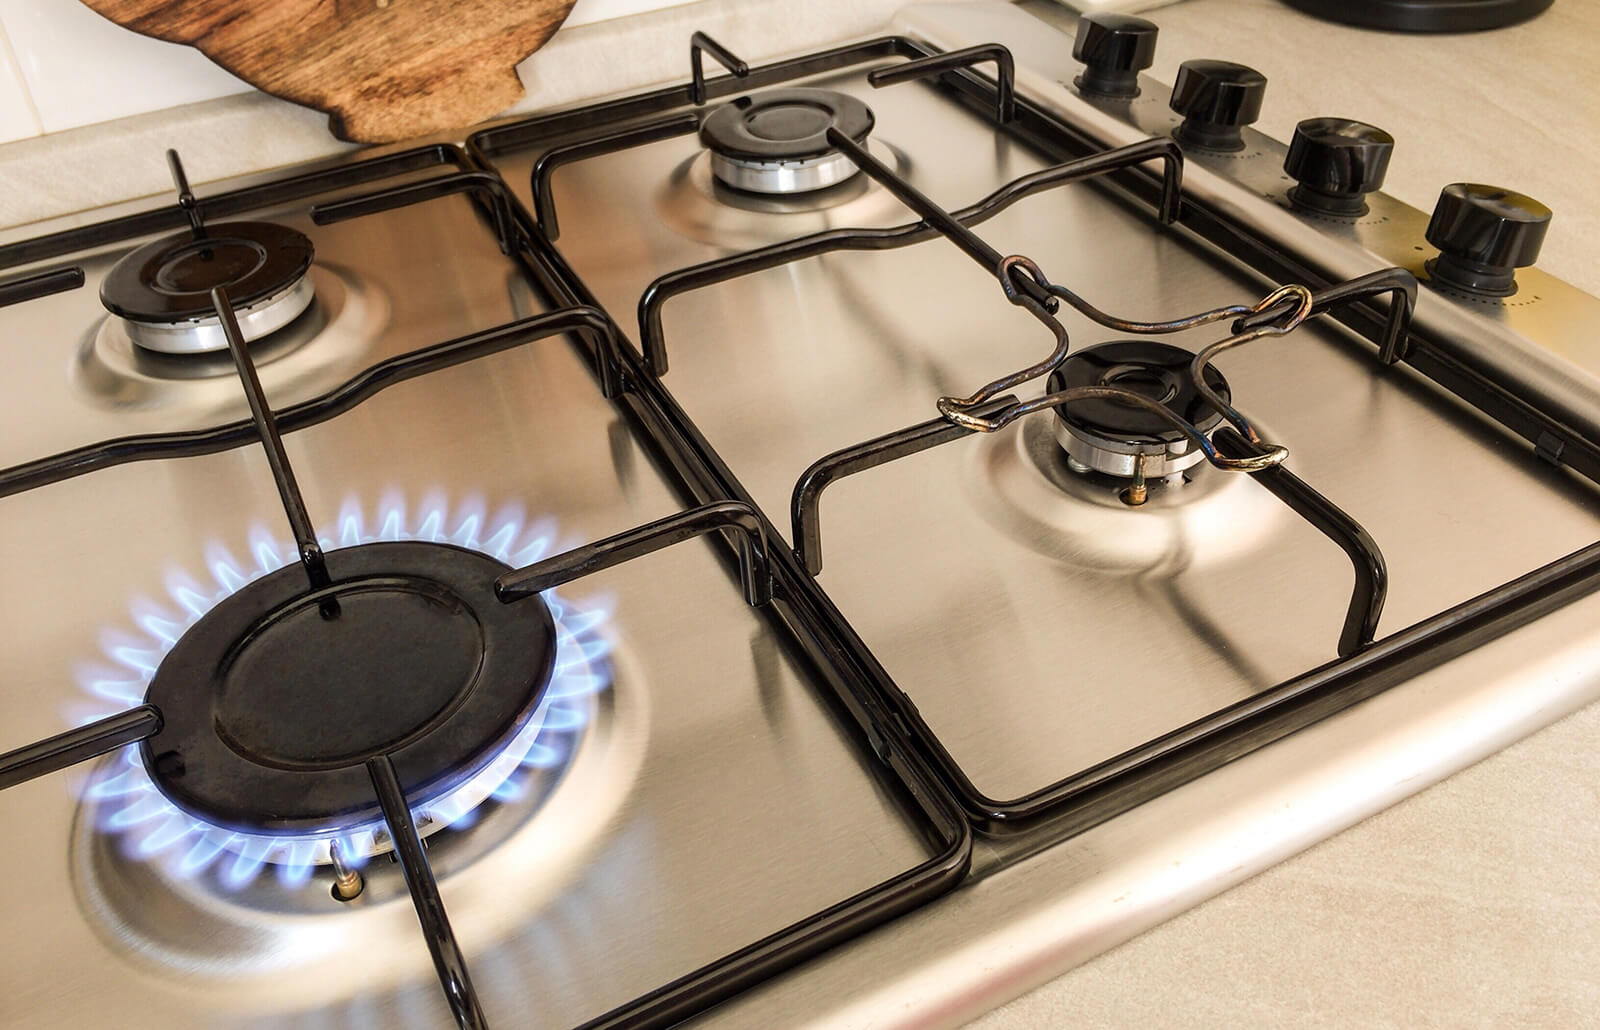 What To Put In Between Stove Burners